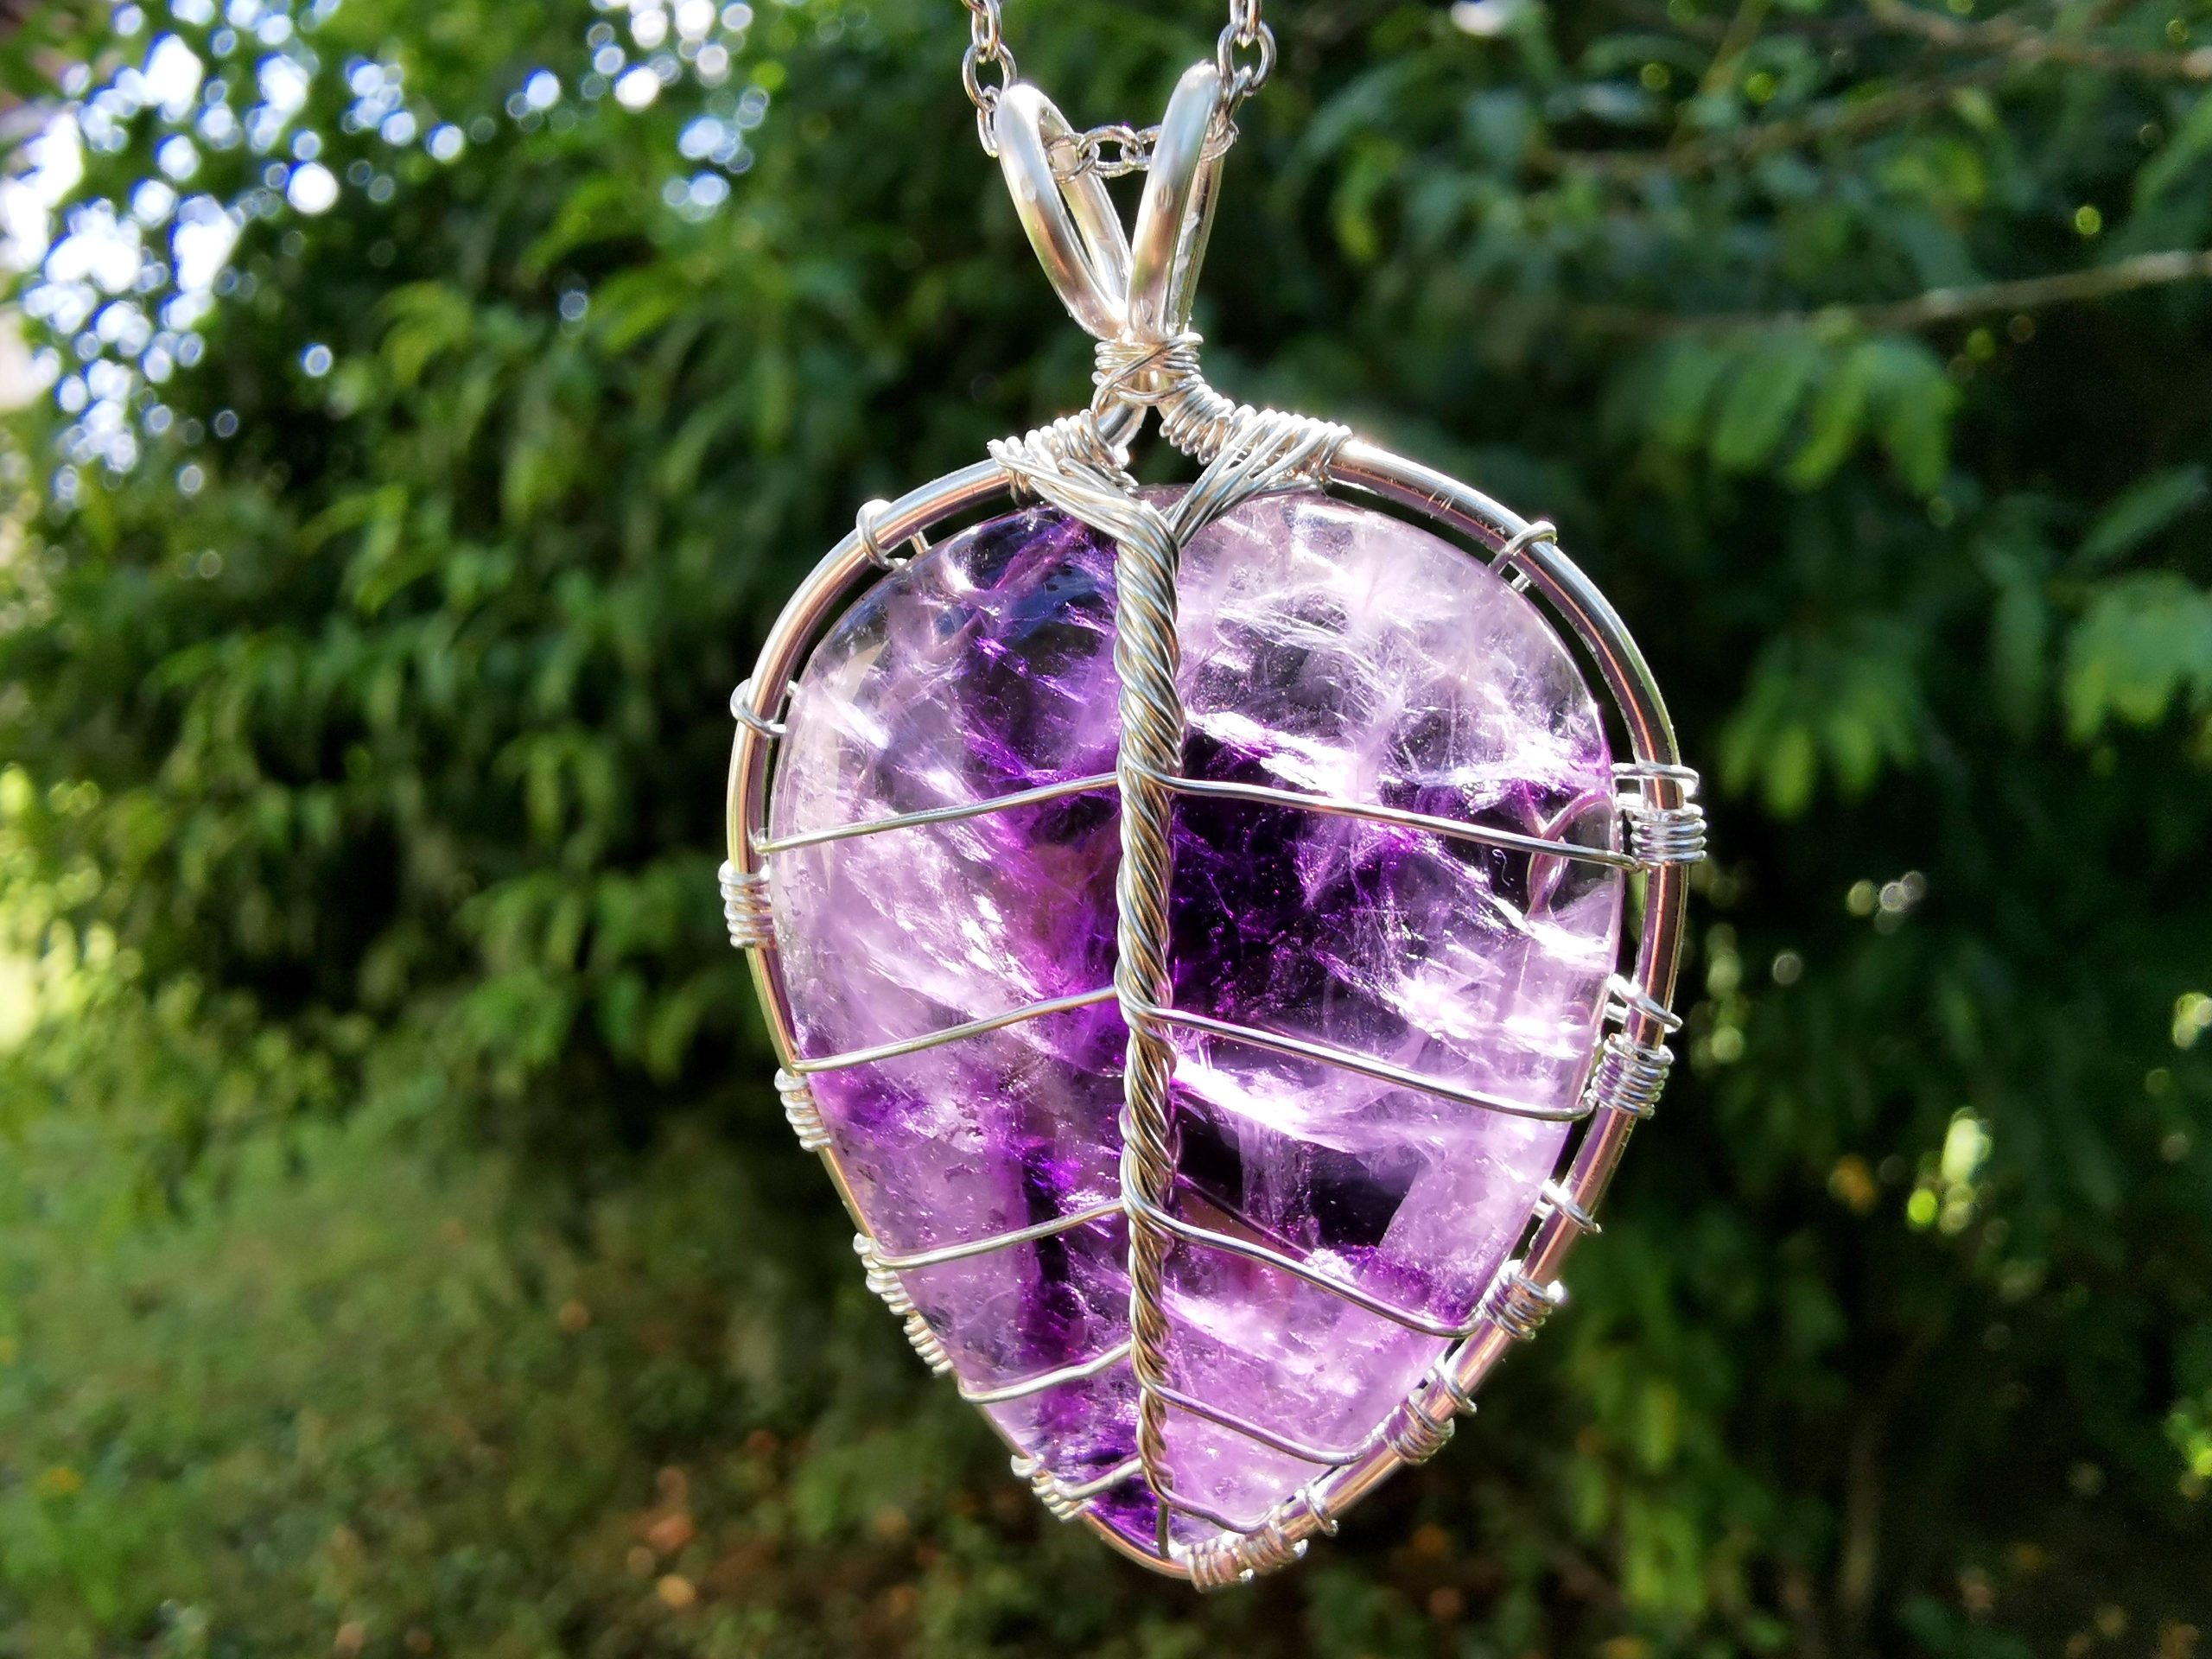 I made a leaf pendant with an amethyst.